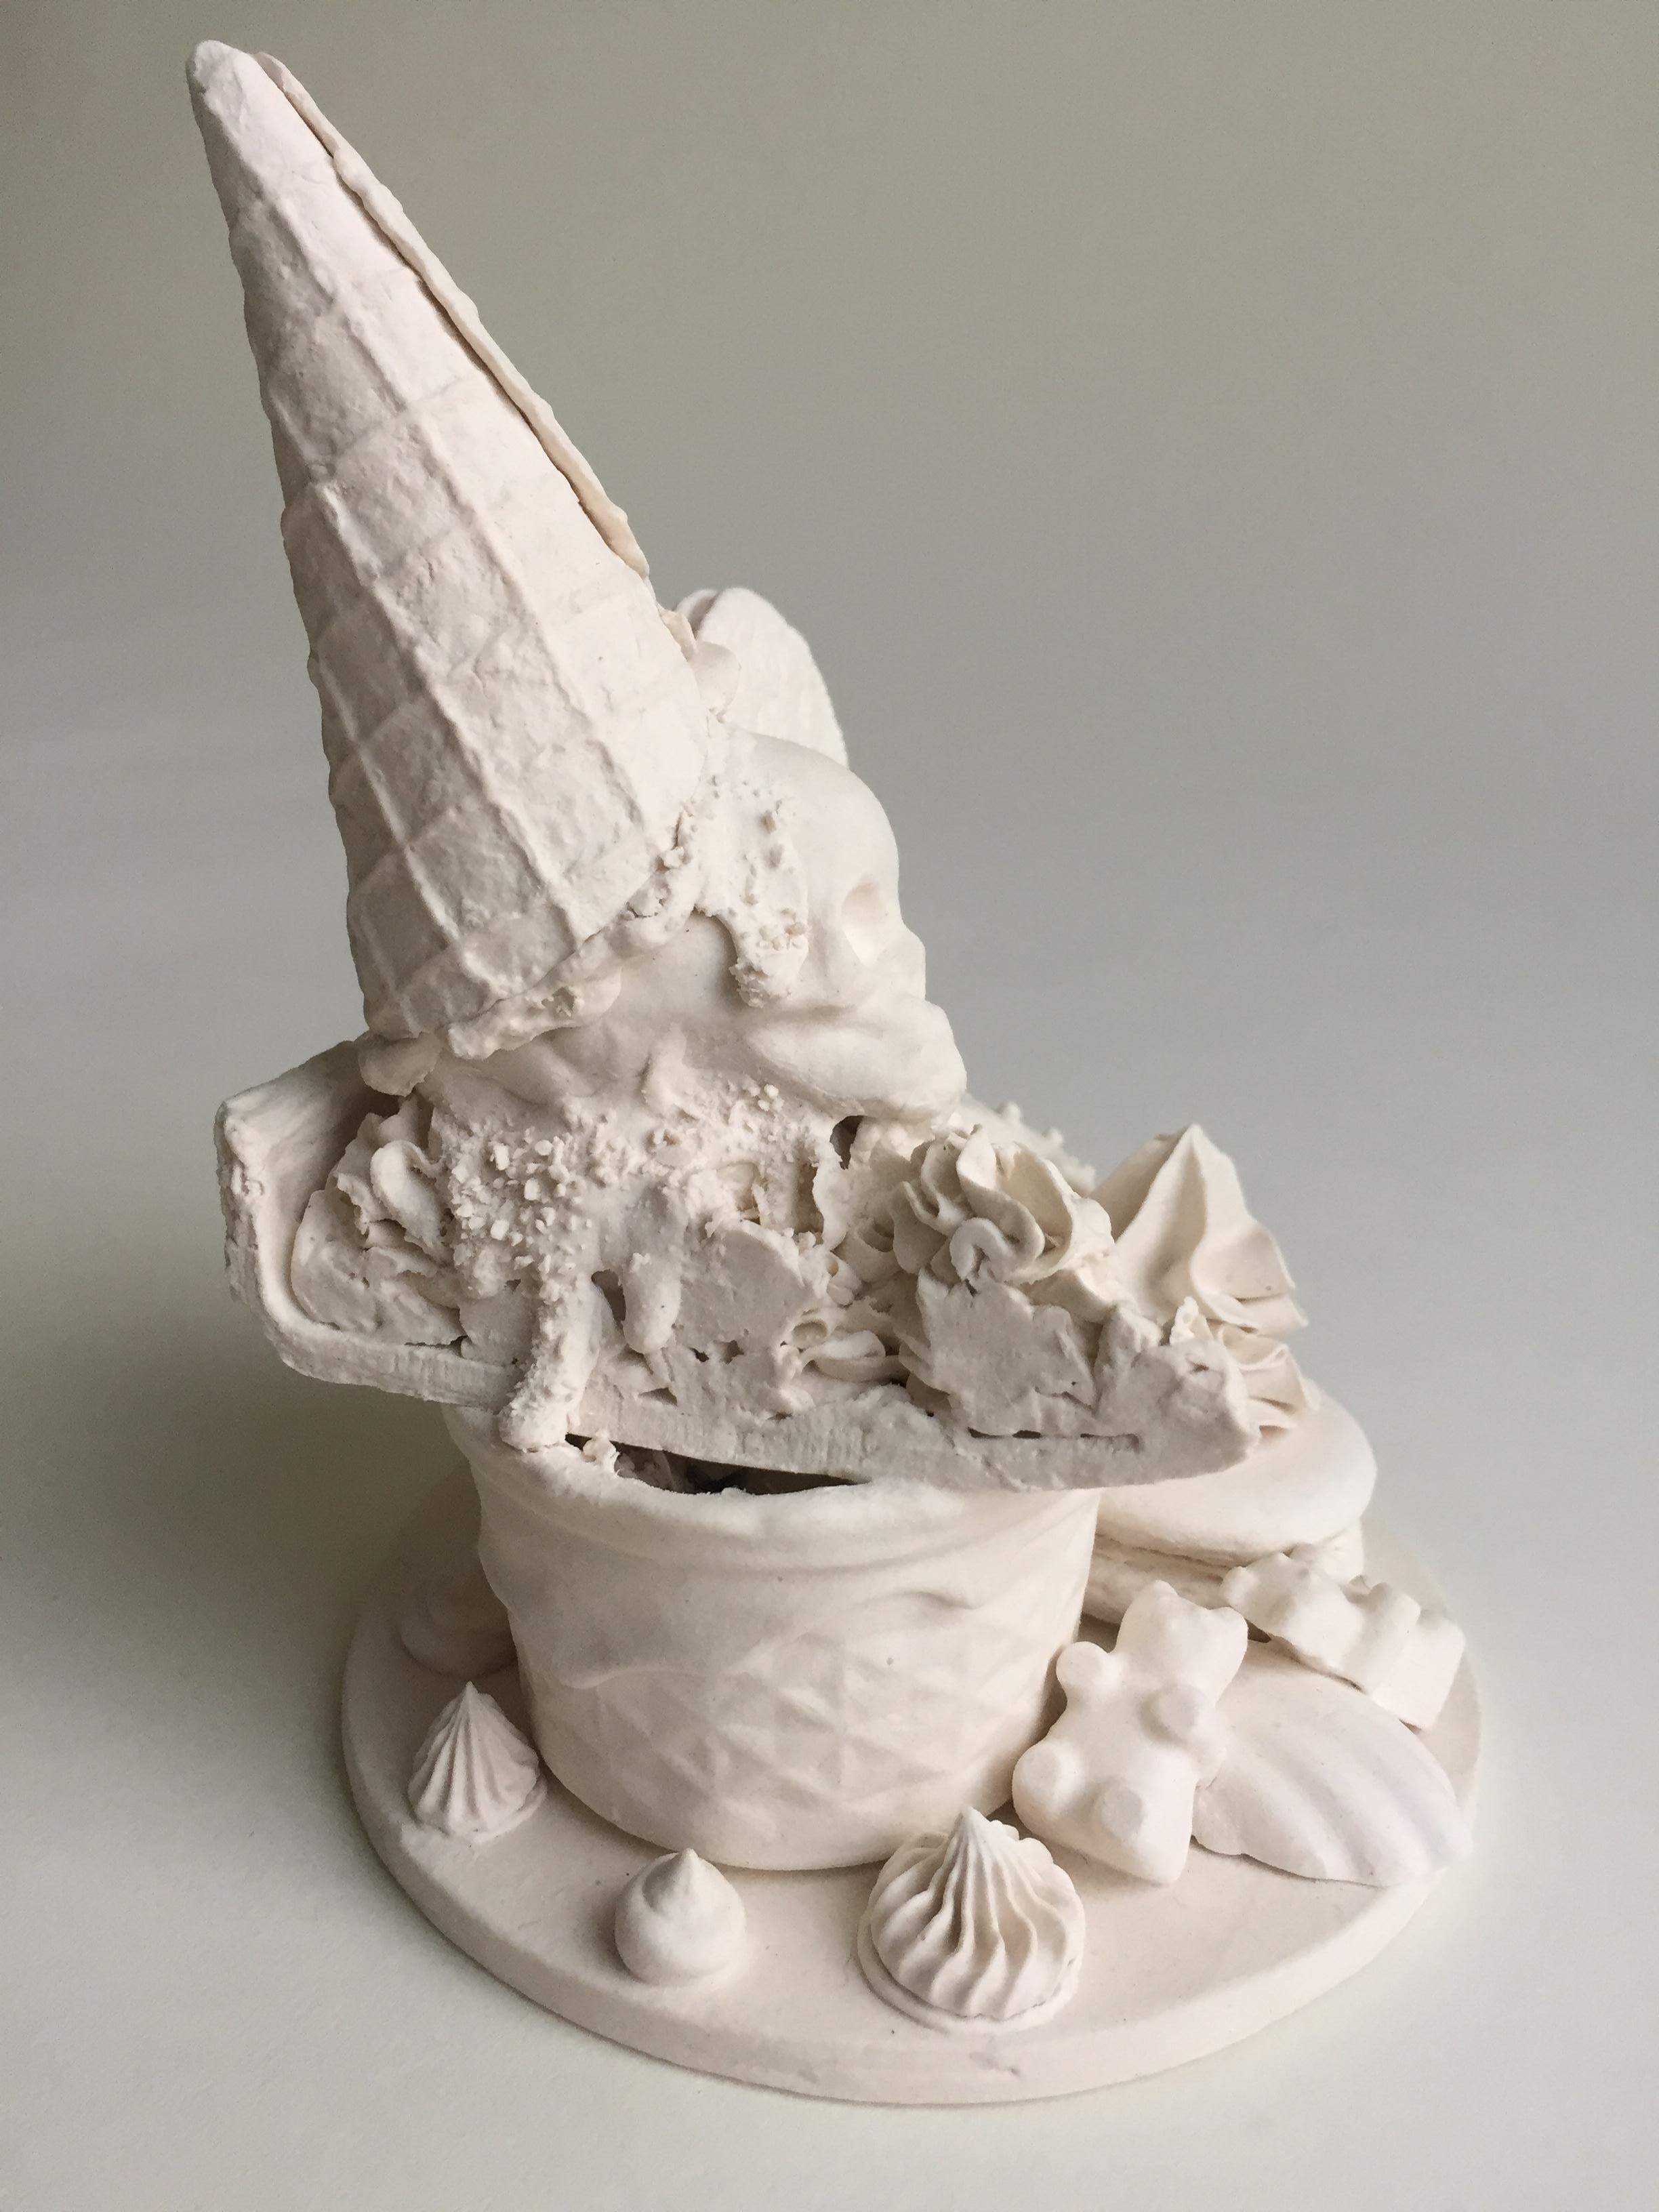 Cookies and Cream - Contemporary Sculpture by Jacqueline Tse